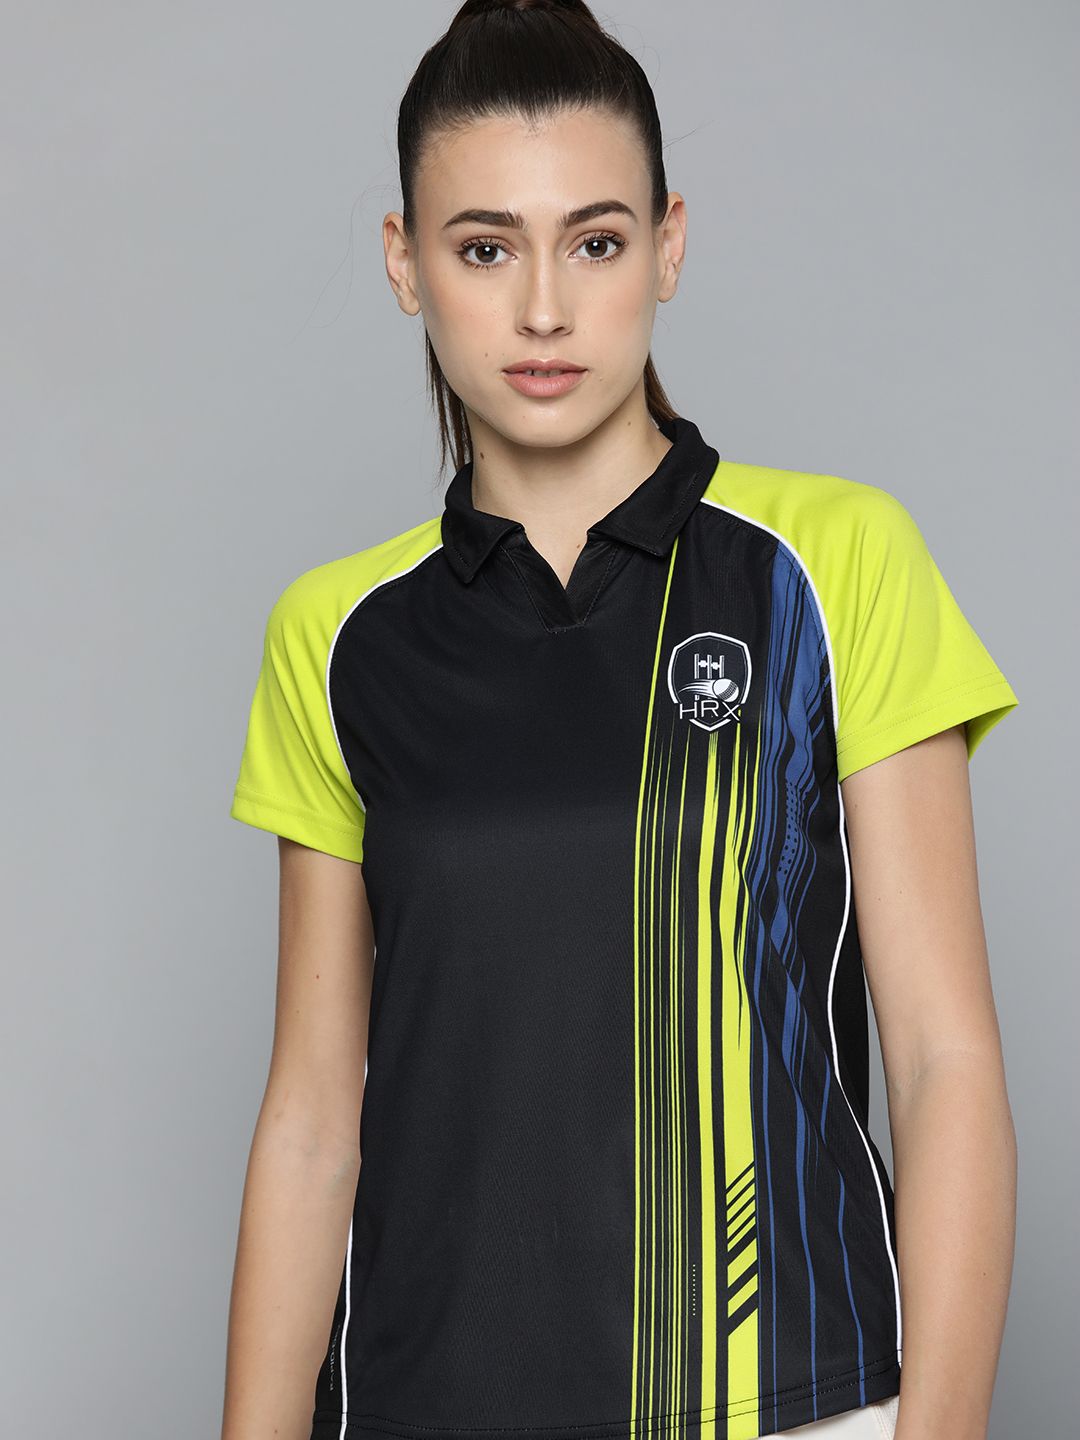 HRX by Hrithik Roshan Cricket Women Jet Black Rapid-Dry Striped Tshirts Price in India